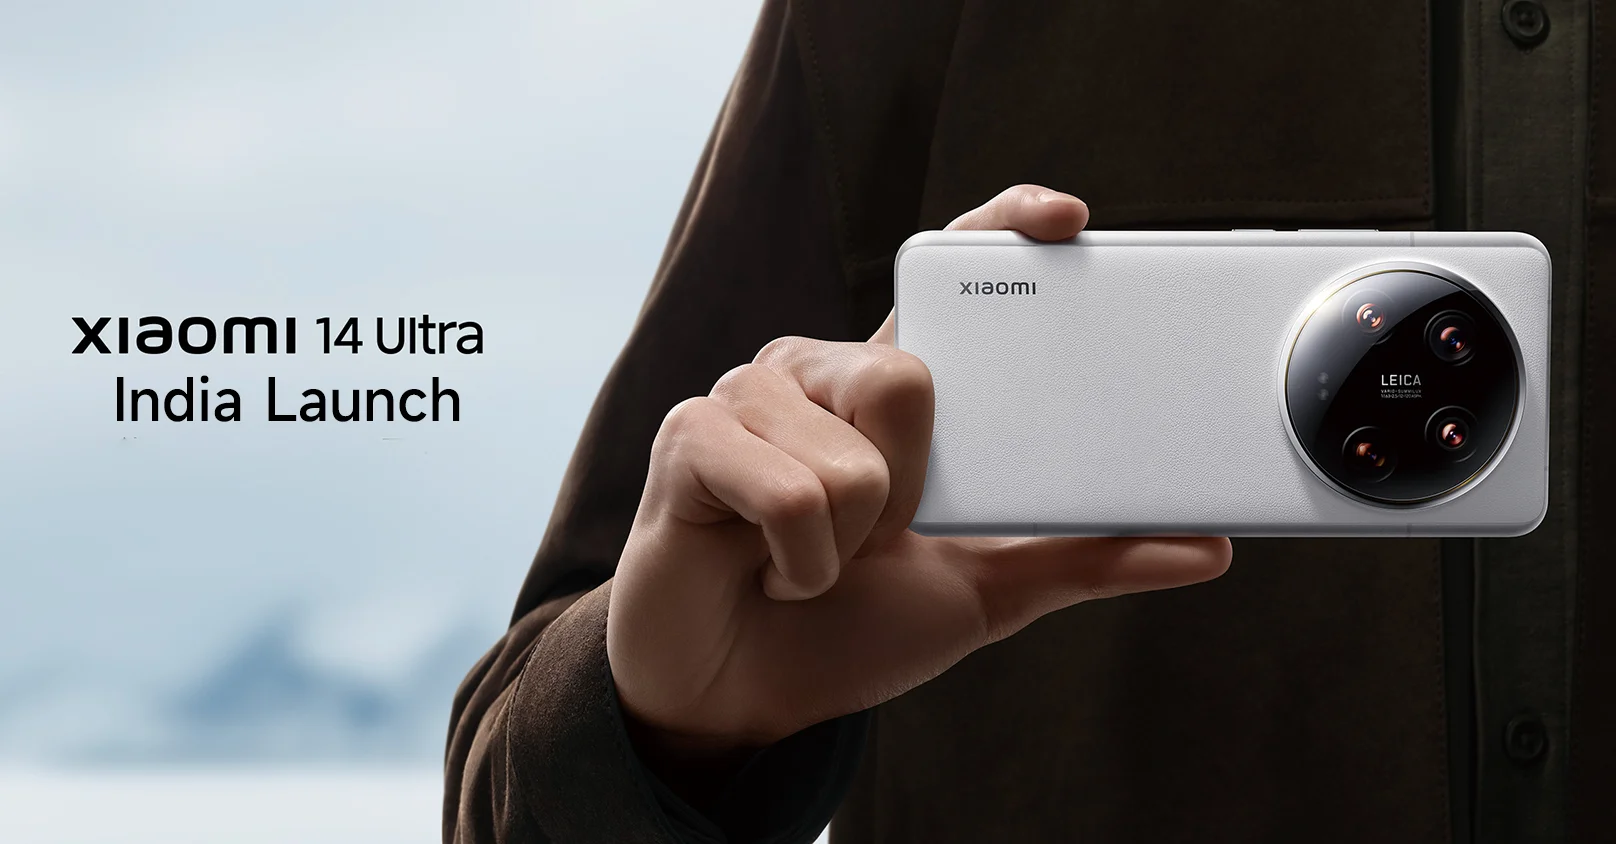 Exclusive Xiaomi 14 Ultra will be officially launched in India